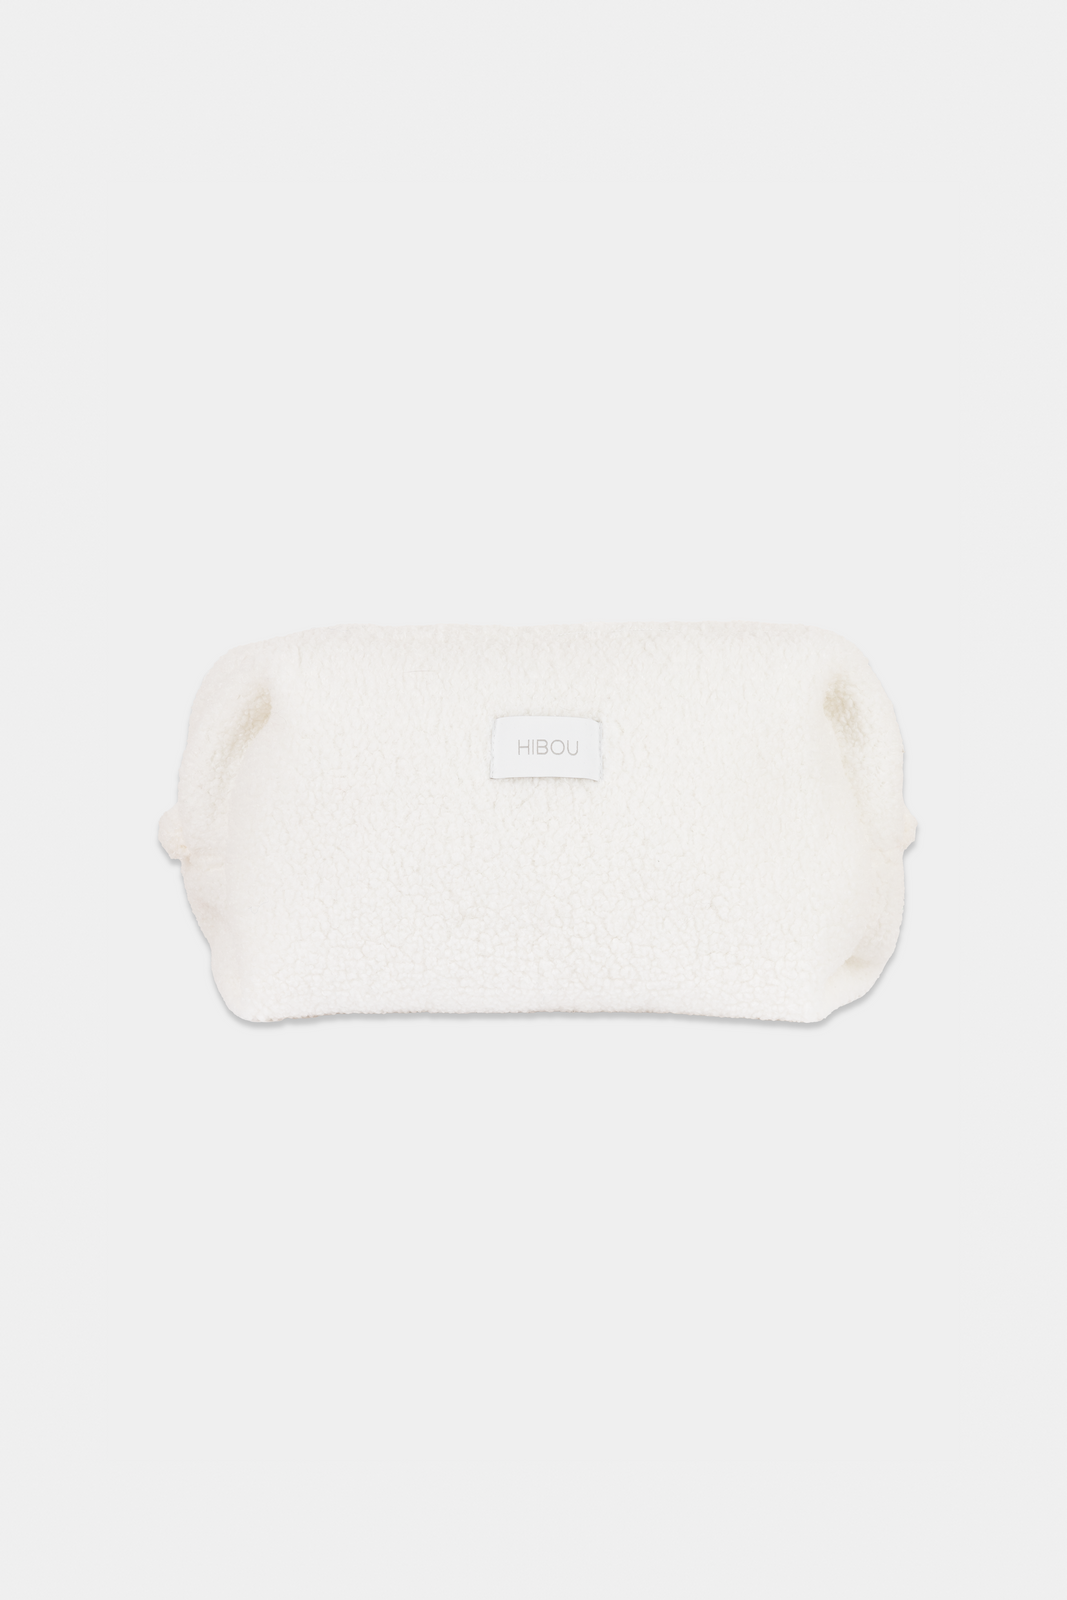 Small Teddy Toiletry Bag in Off-White